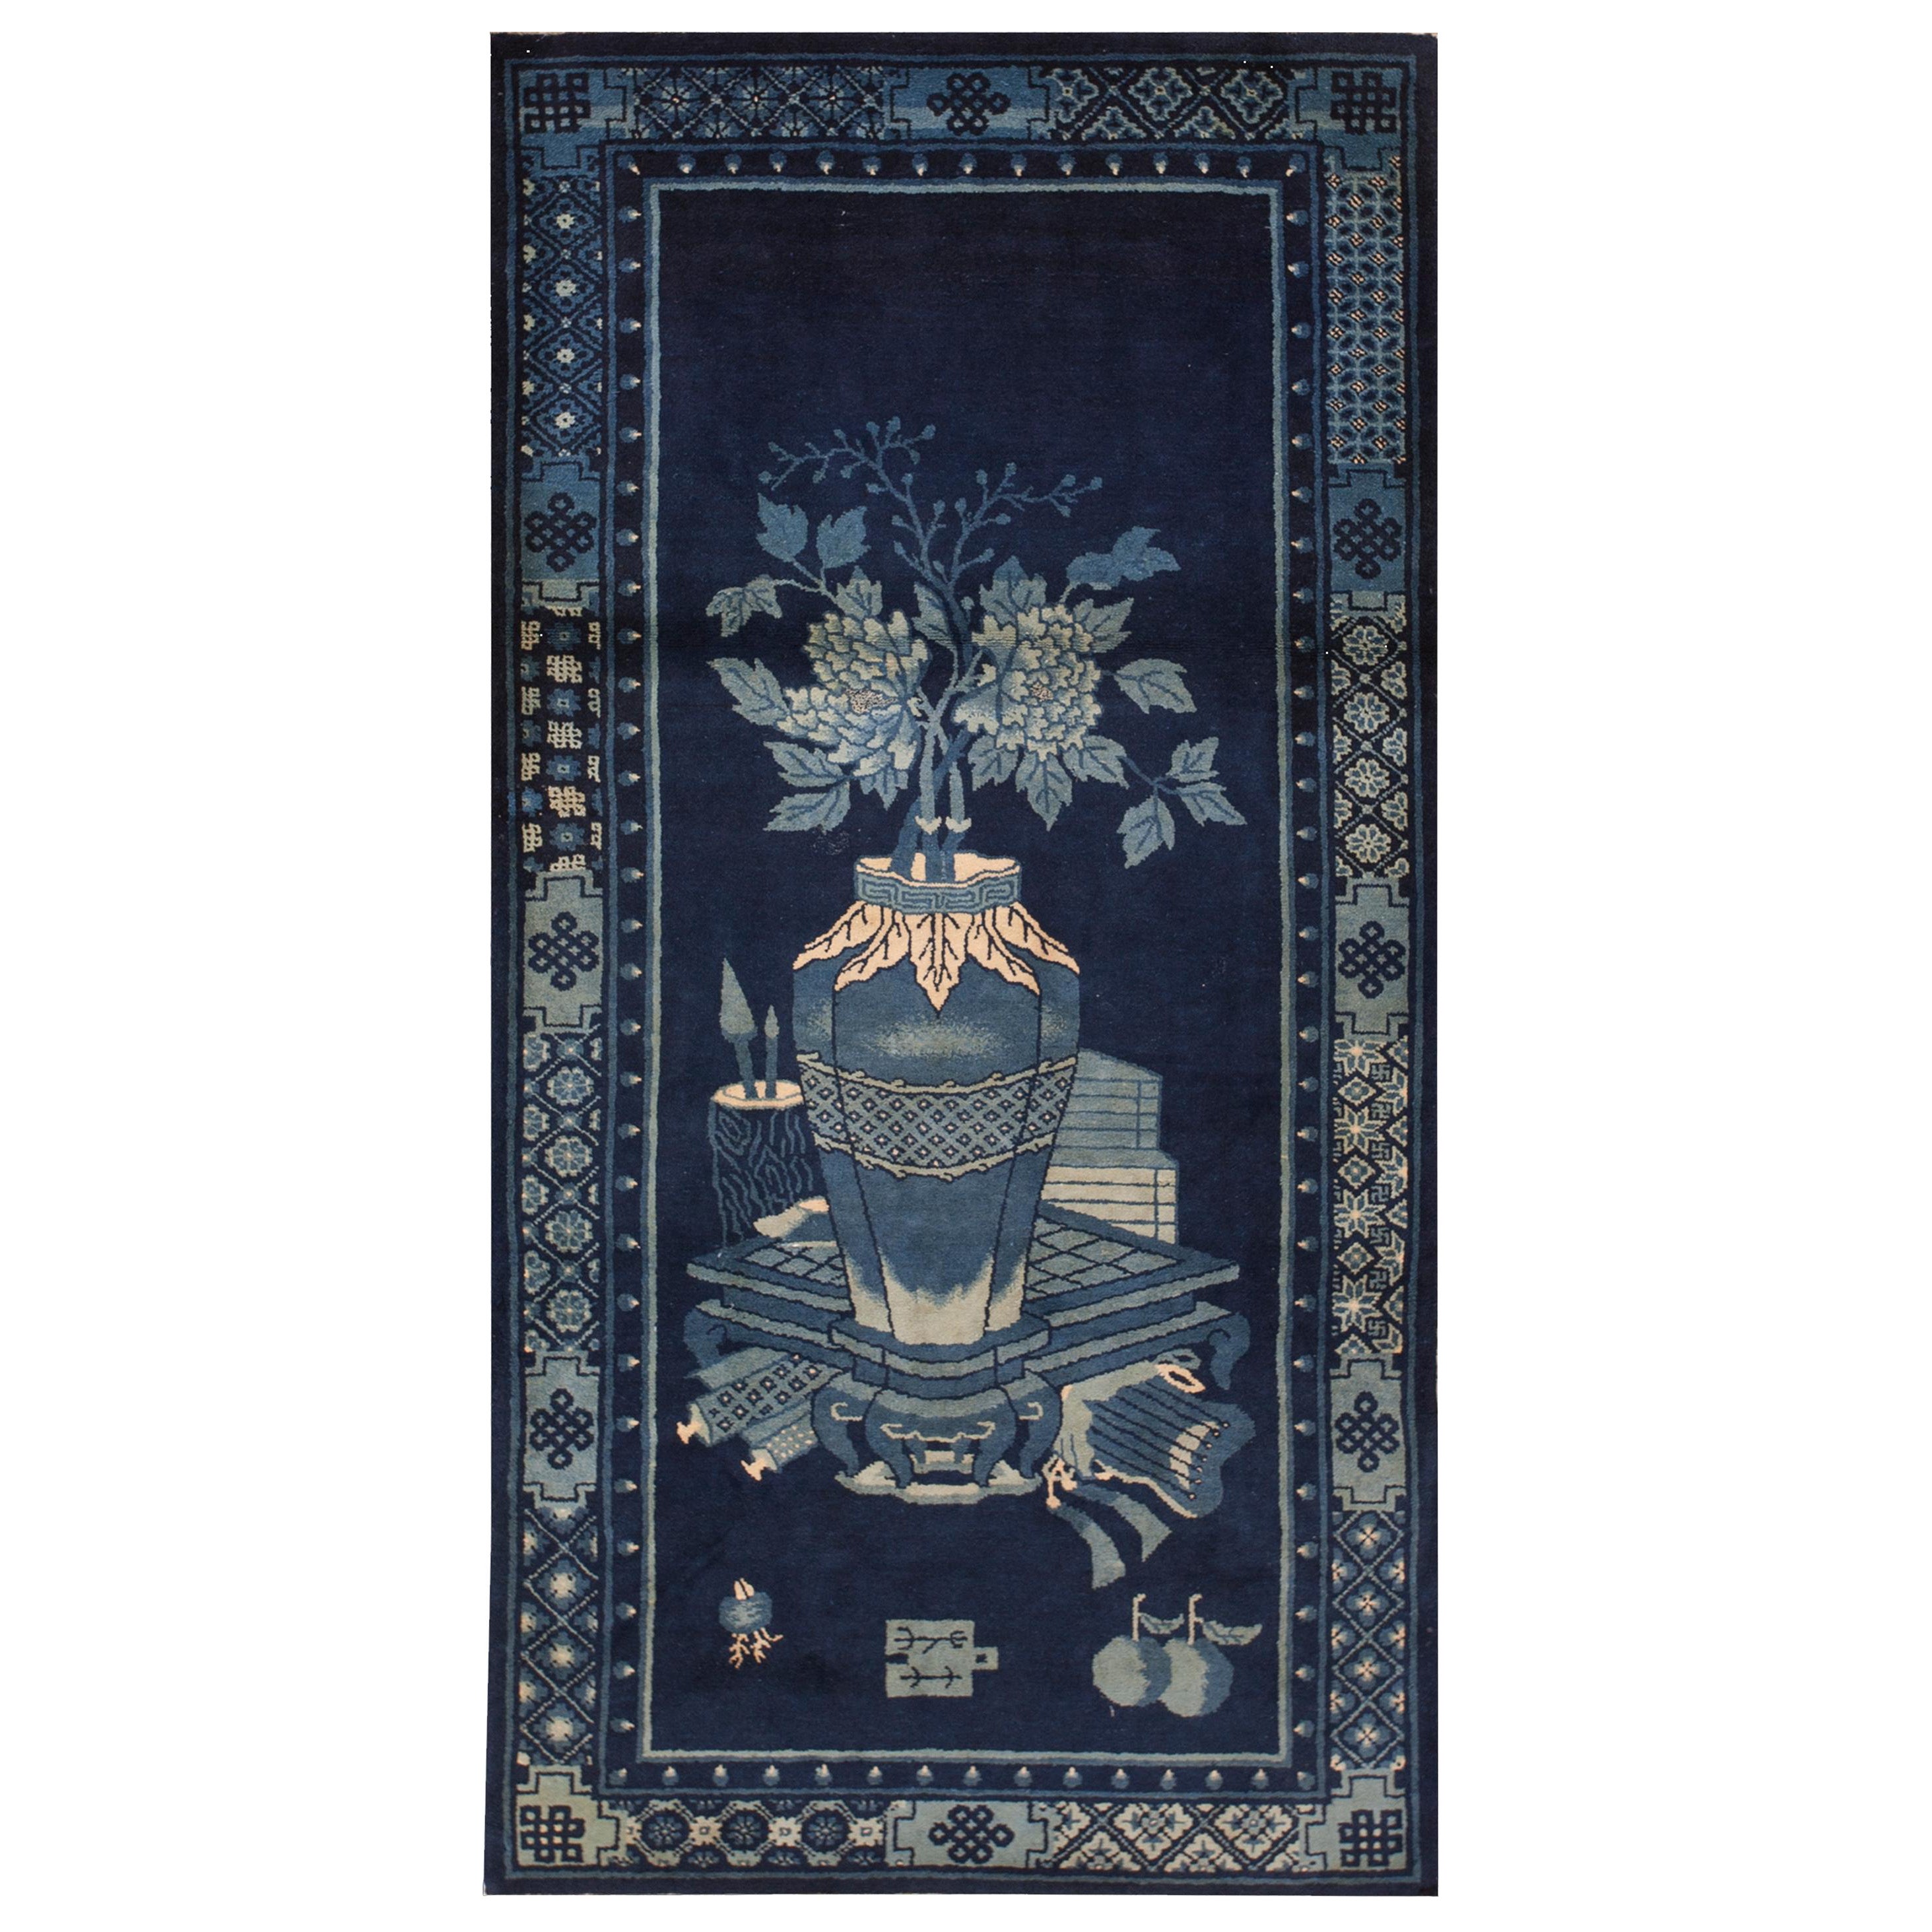 Early 20th Century Chinese Baotou Scholars Carpet ( 3' x 6' - 91 x 183 ) For Sale